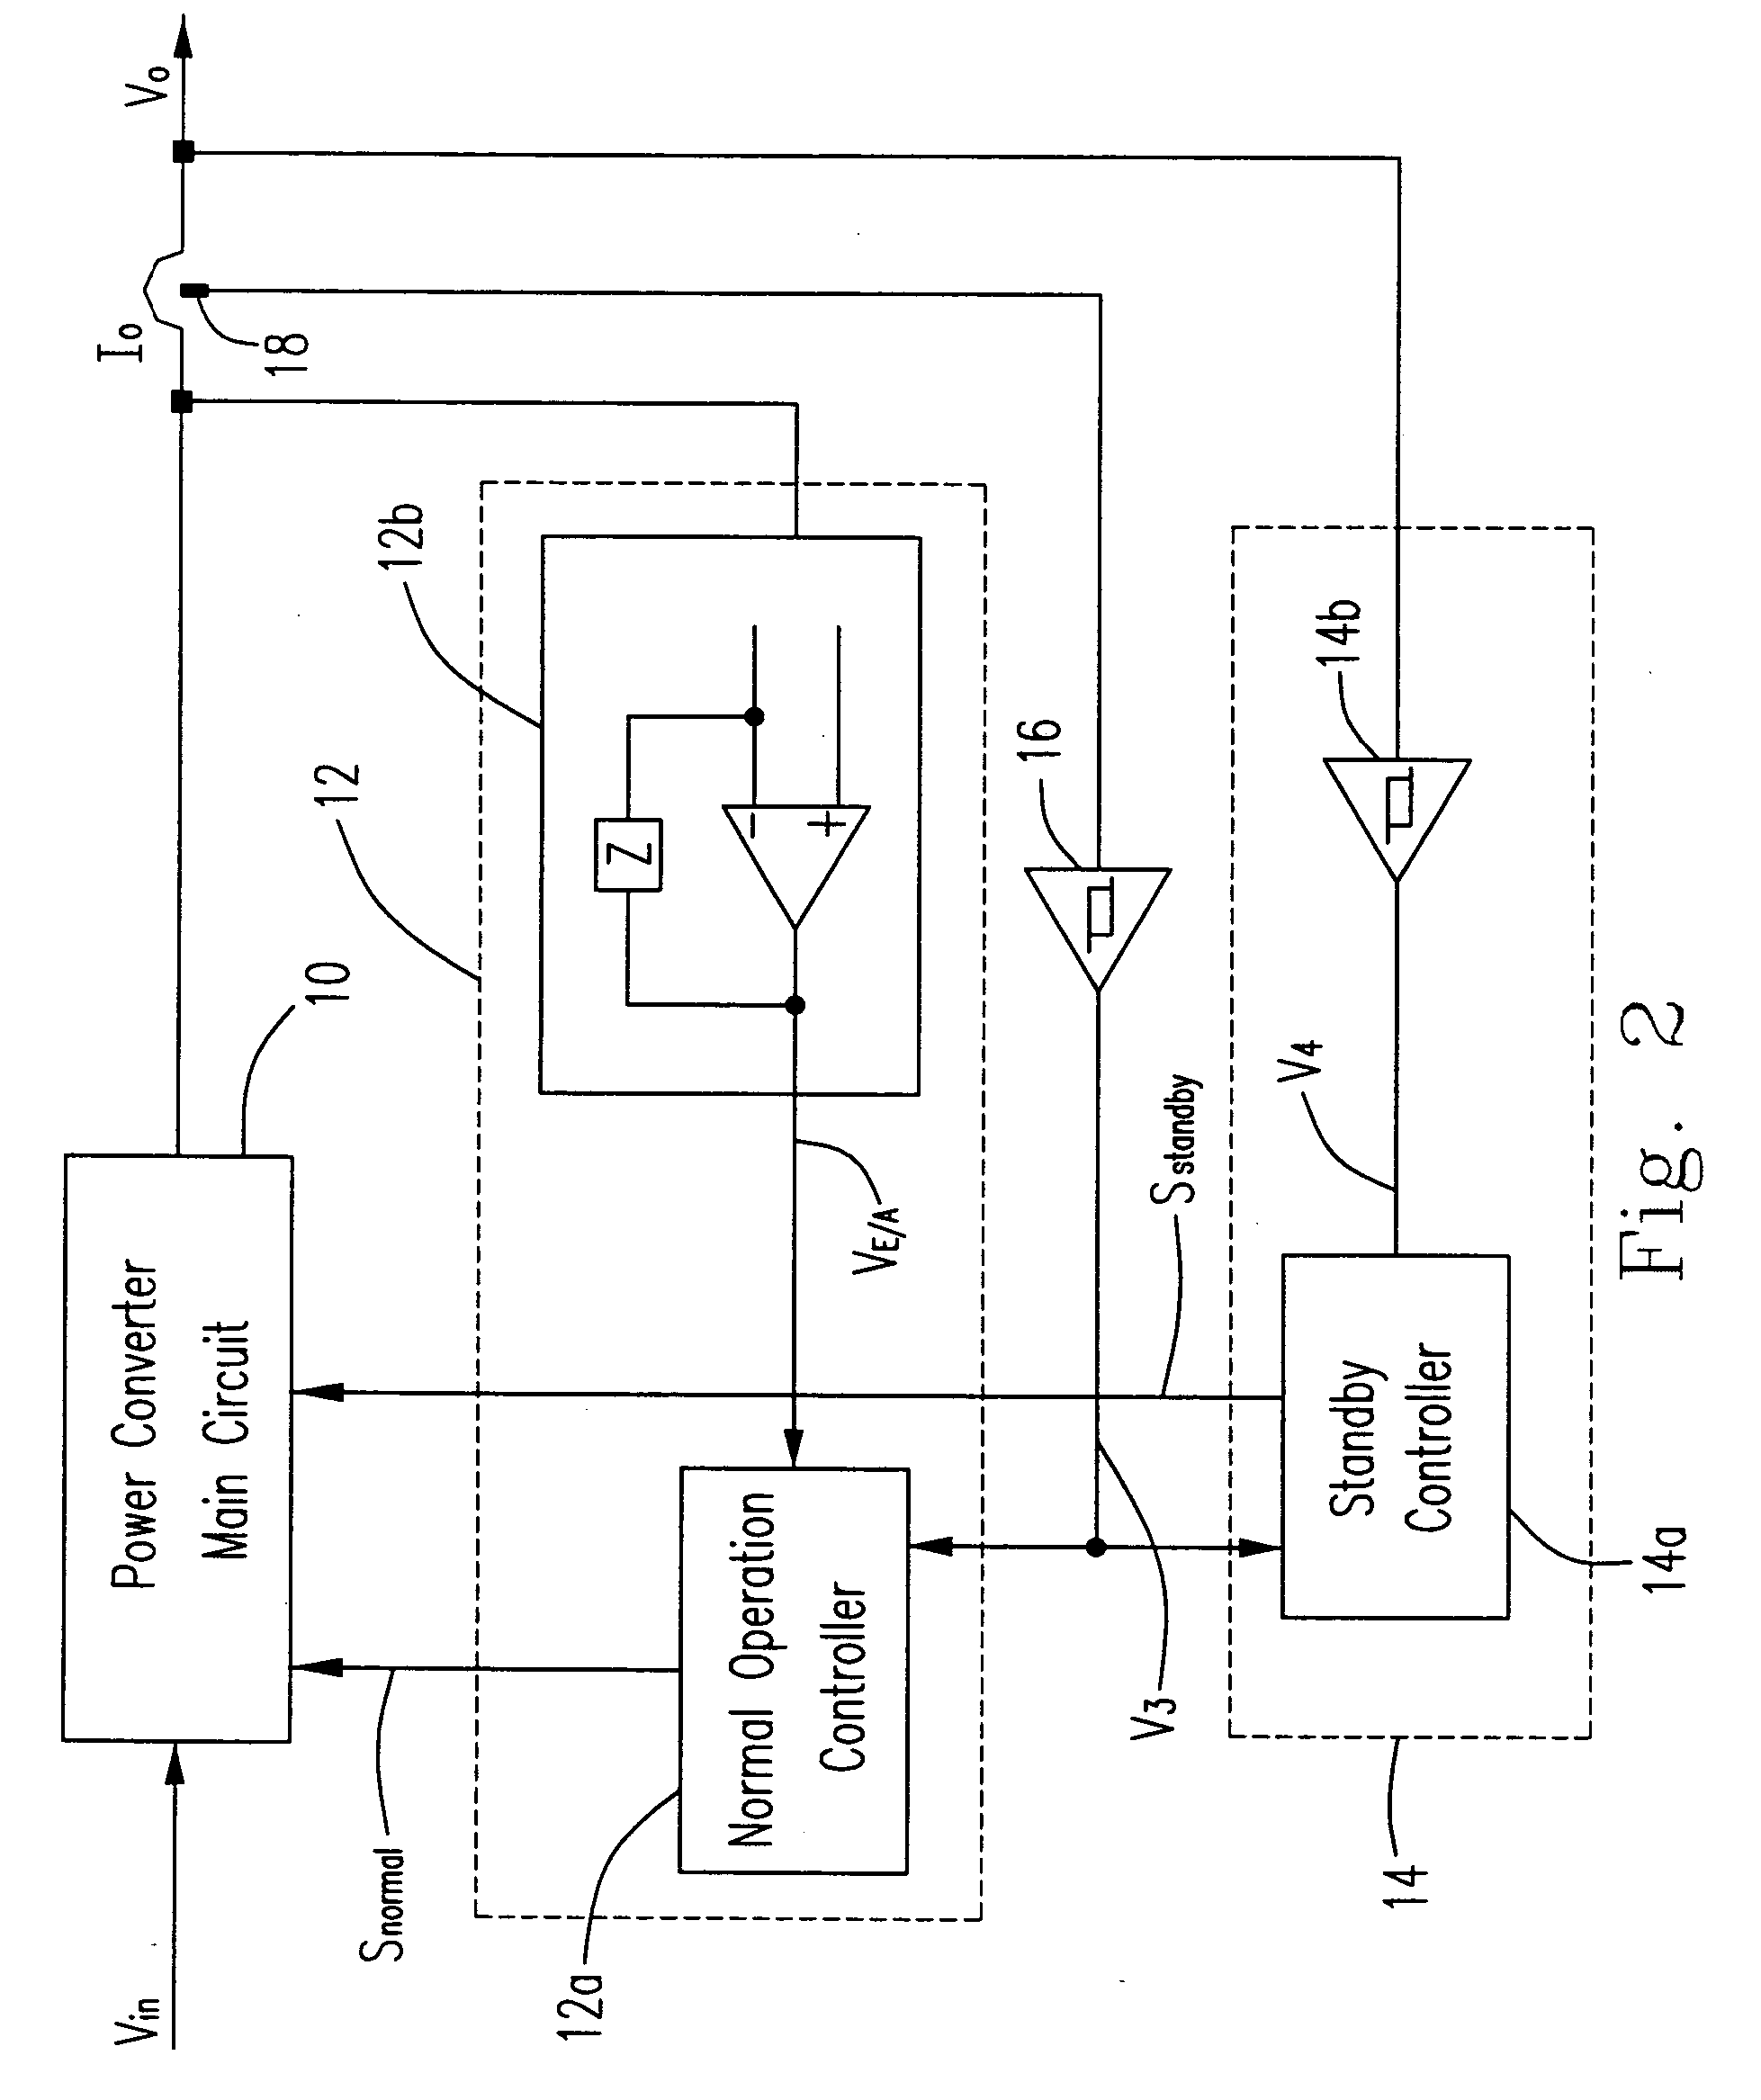 Power supply having efficient low power standby mode